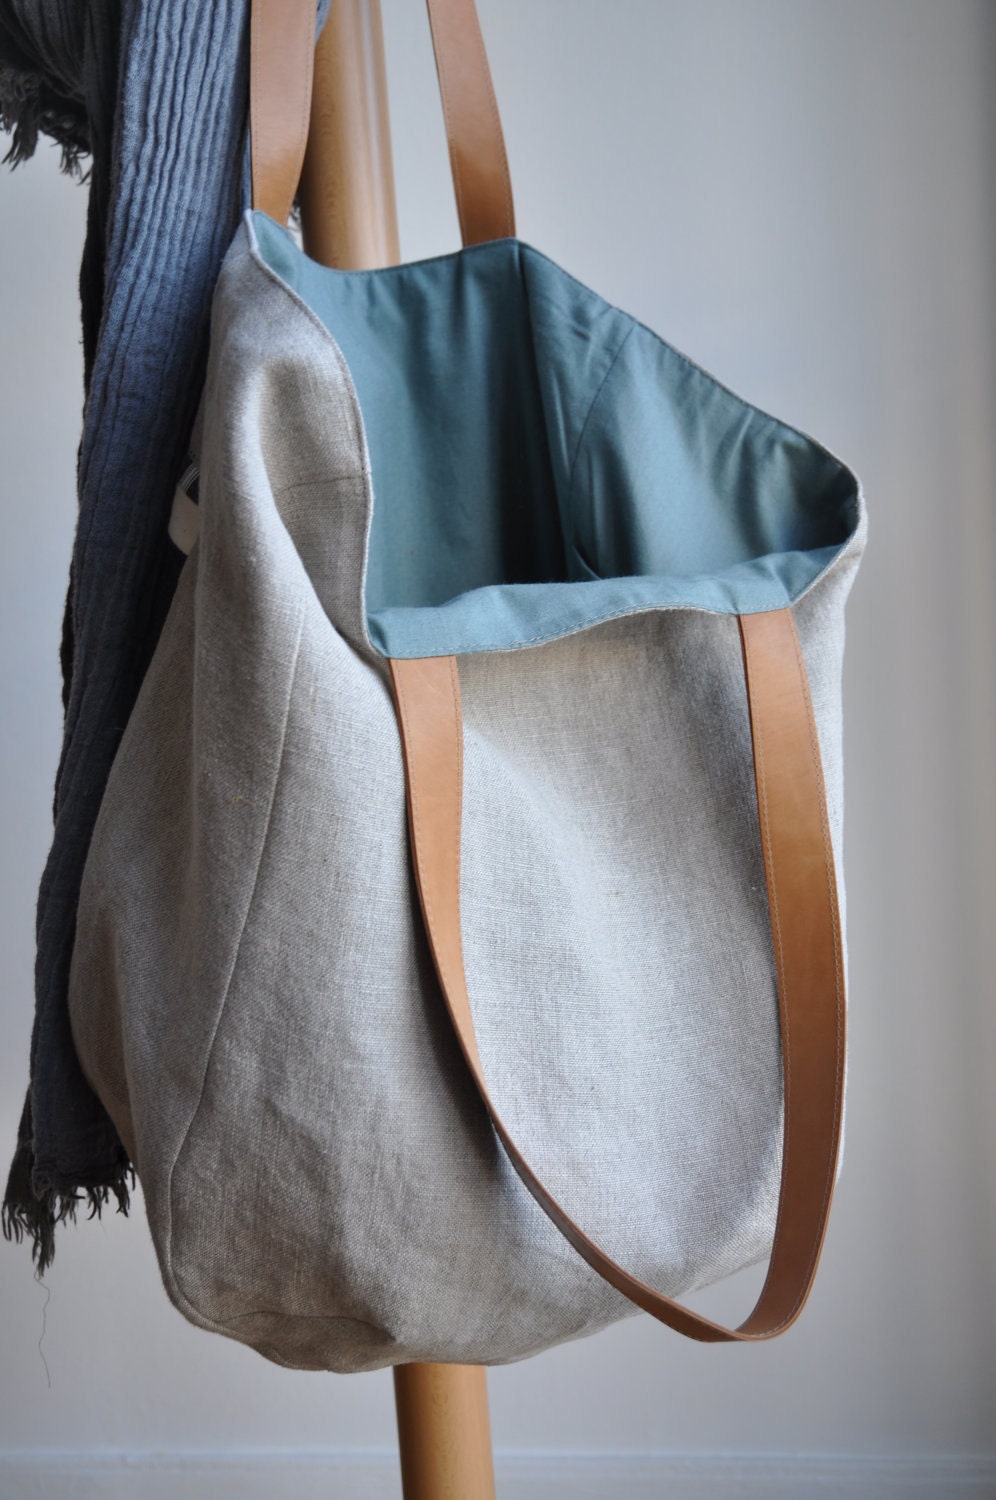 Patchwork linen bag with leather handles